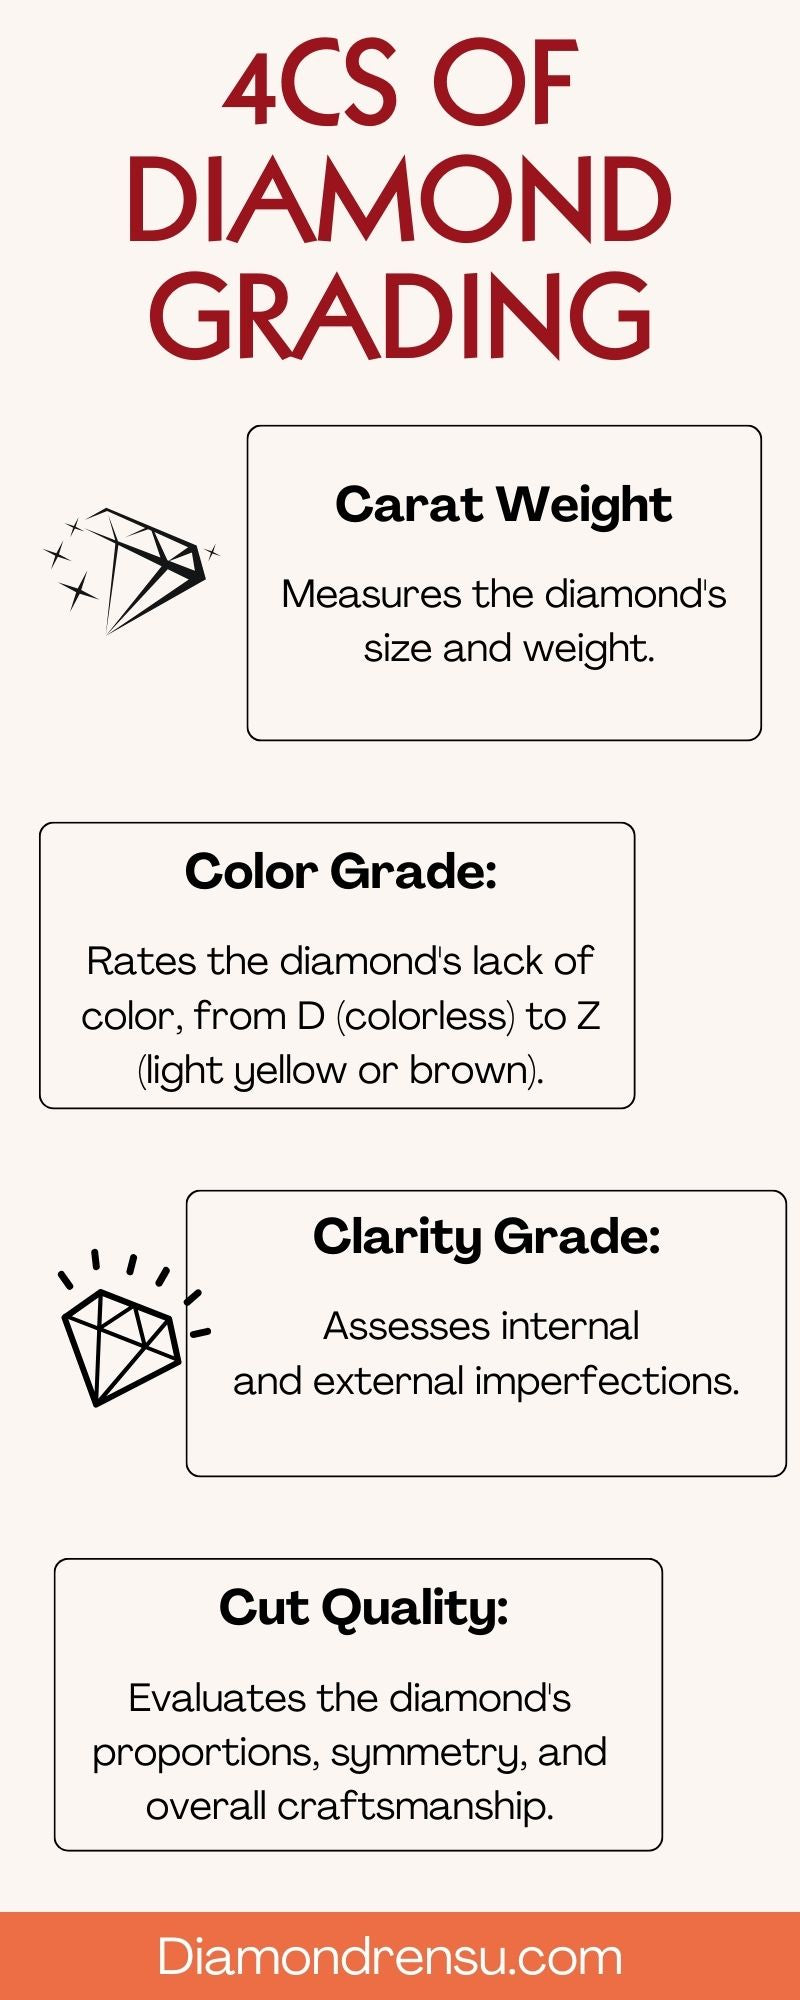 Diamond grading chart shown in the picture.